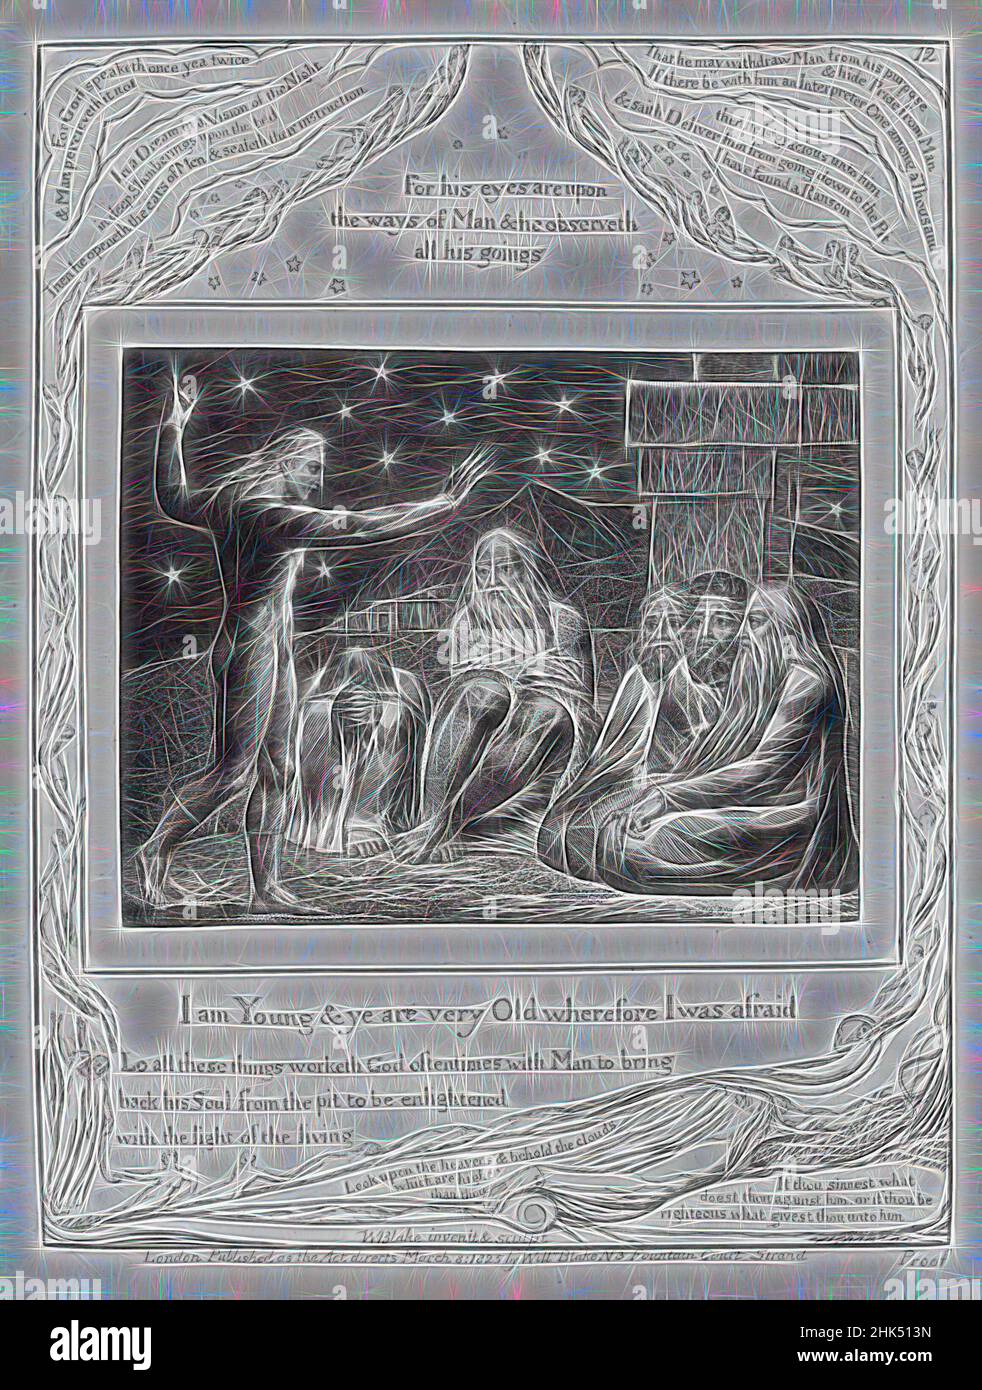 Inspired by I Am Young & Ye Are Very Old Wherefore I Was Afraid, from Illustrations of the Book of Job, William Blake, British, 1757-1827, Engraving, 1825, 8 5/16 x 6 7/16 in., 21.1 x 16.3 cm, Reimagined by Artotop. Classic art reinvented with a modern twist. Design of warm cheerful glowing of brightness and light ray radiance. Photography inspired by surrealism and futurism, embracing dynamic energy of modern technology, movement, speed and revolutionize culture Stock Photo